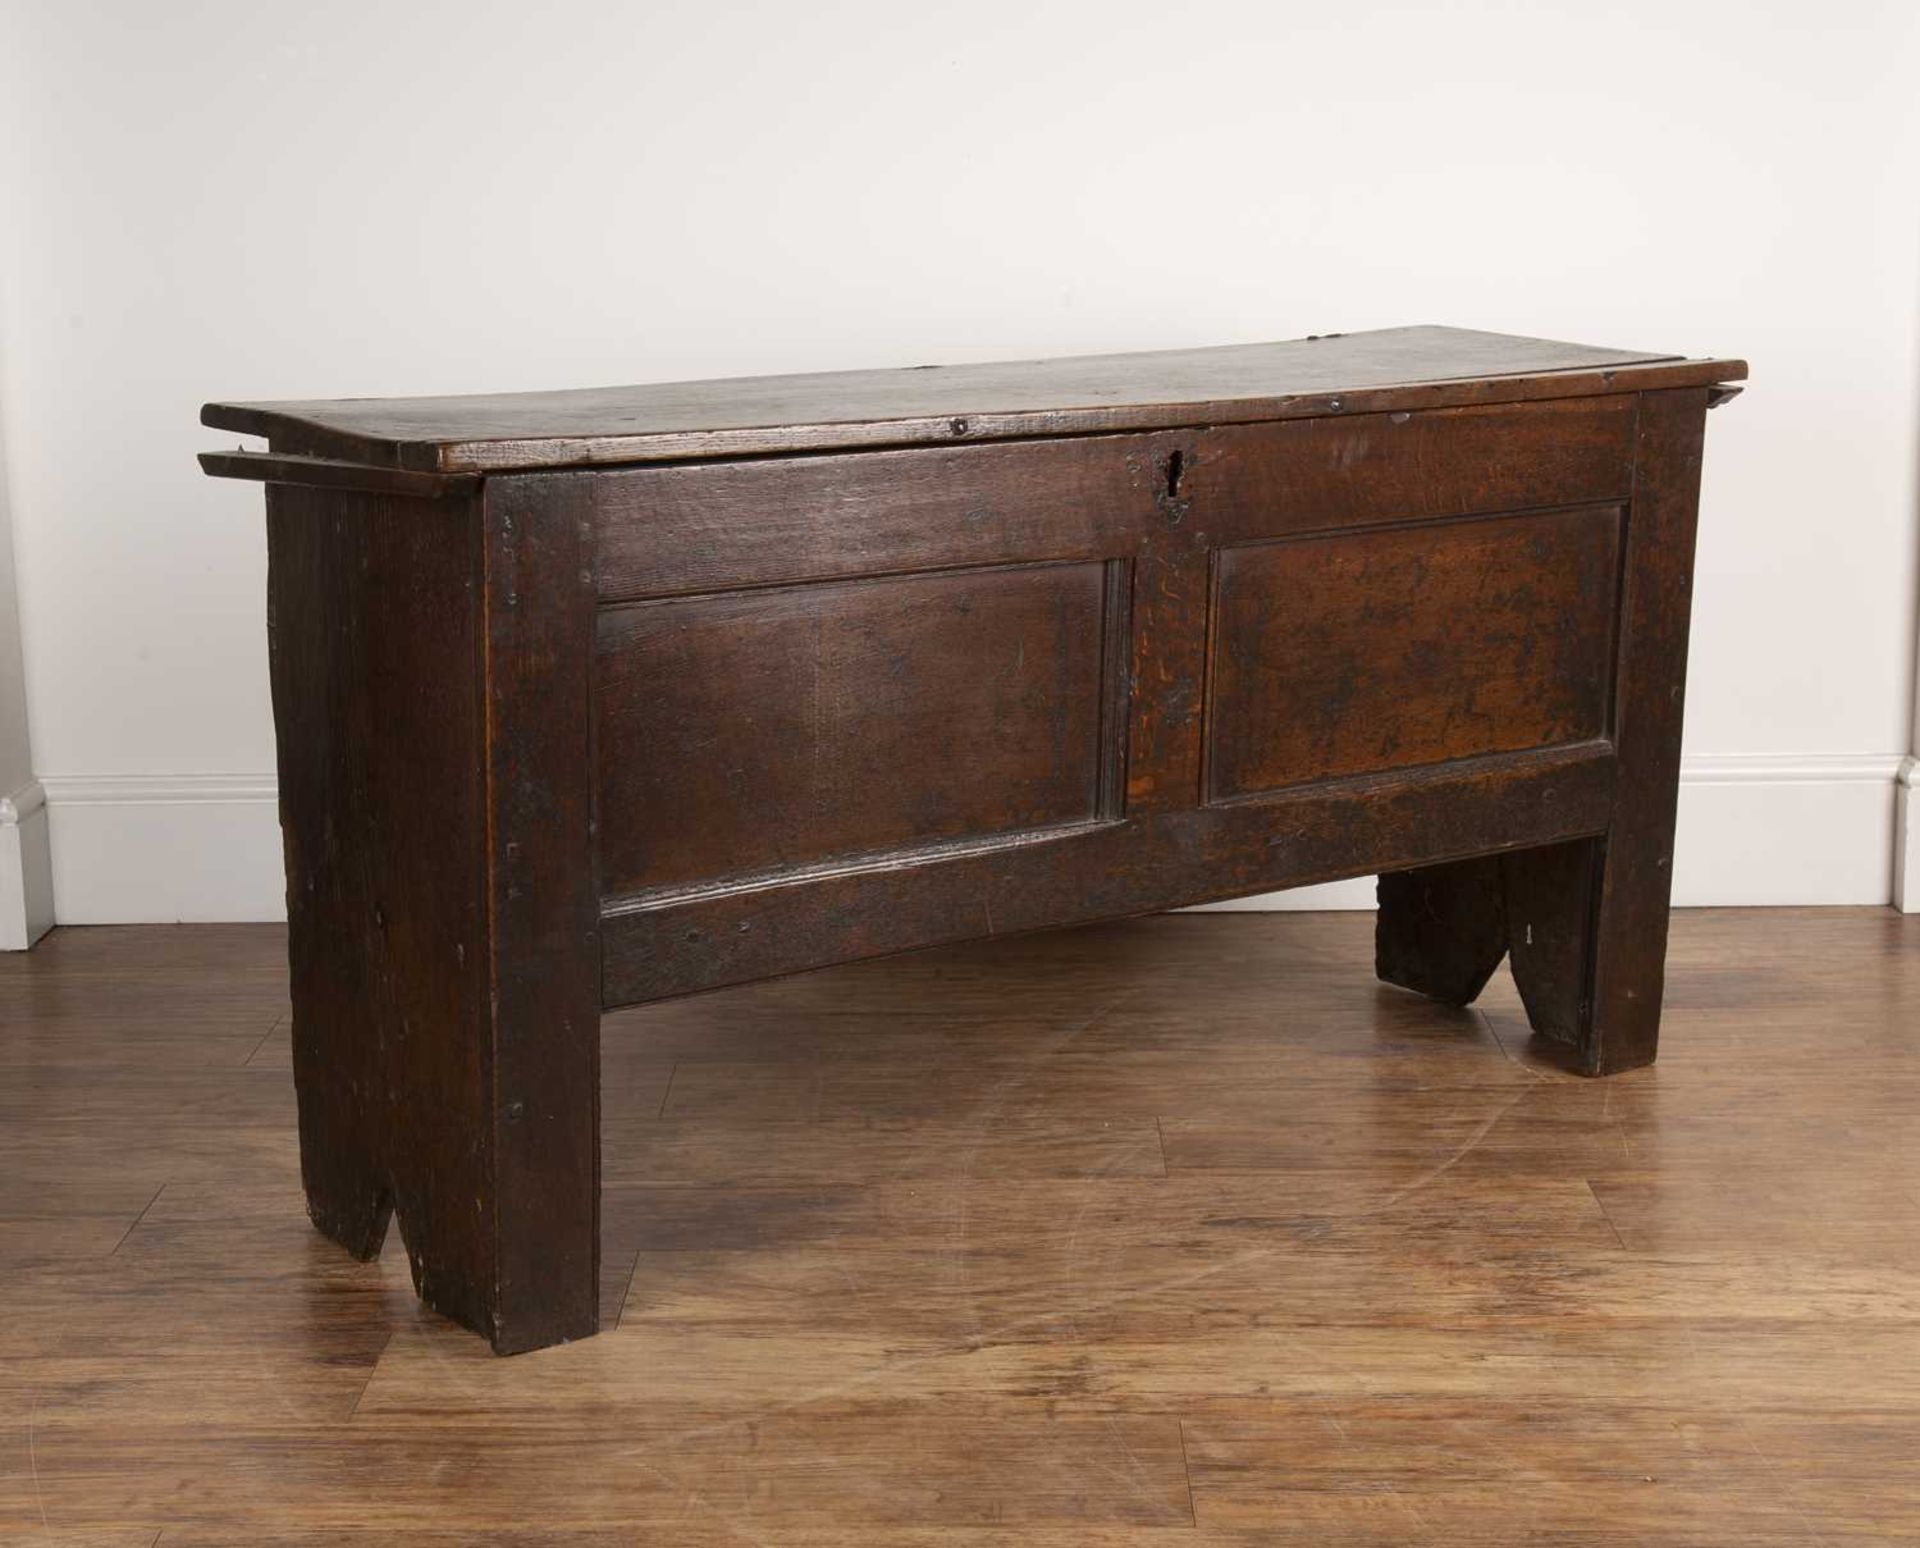 Oak coffer late 17th Century, with a plain double panel front and with iron hinges, 132.5cm wide x - Bild 2 aus 5